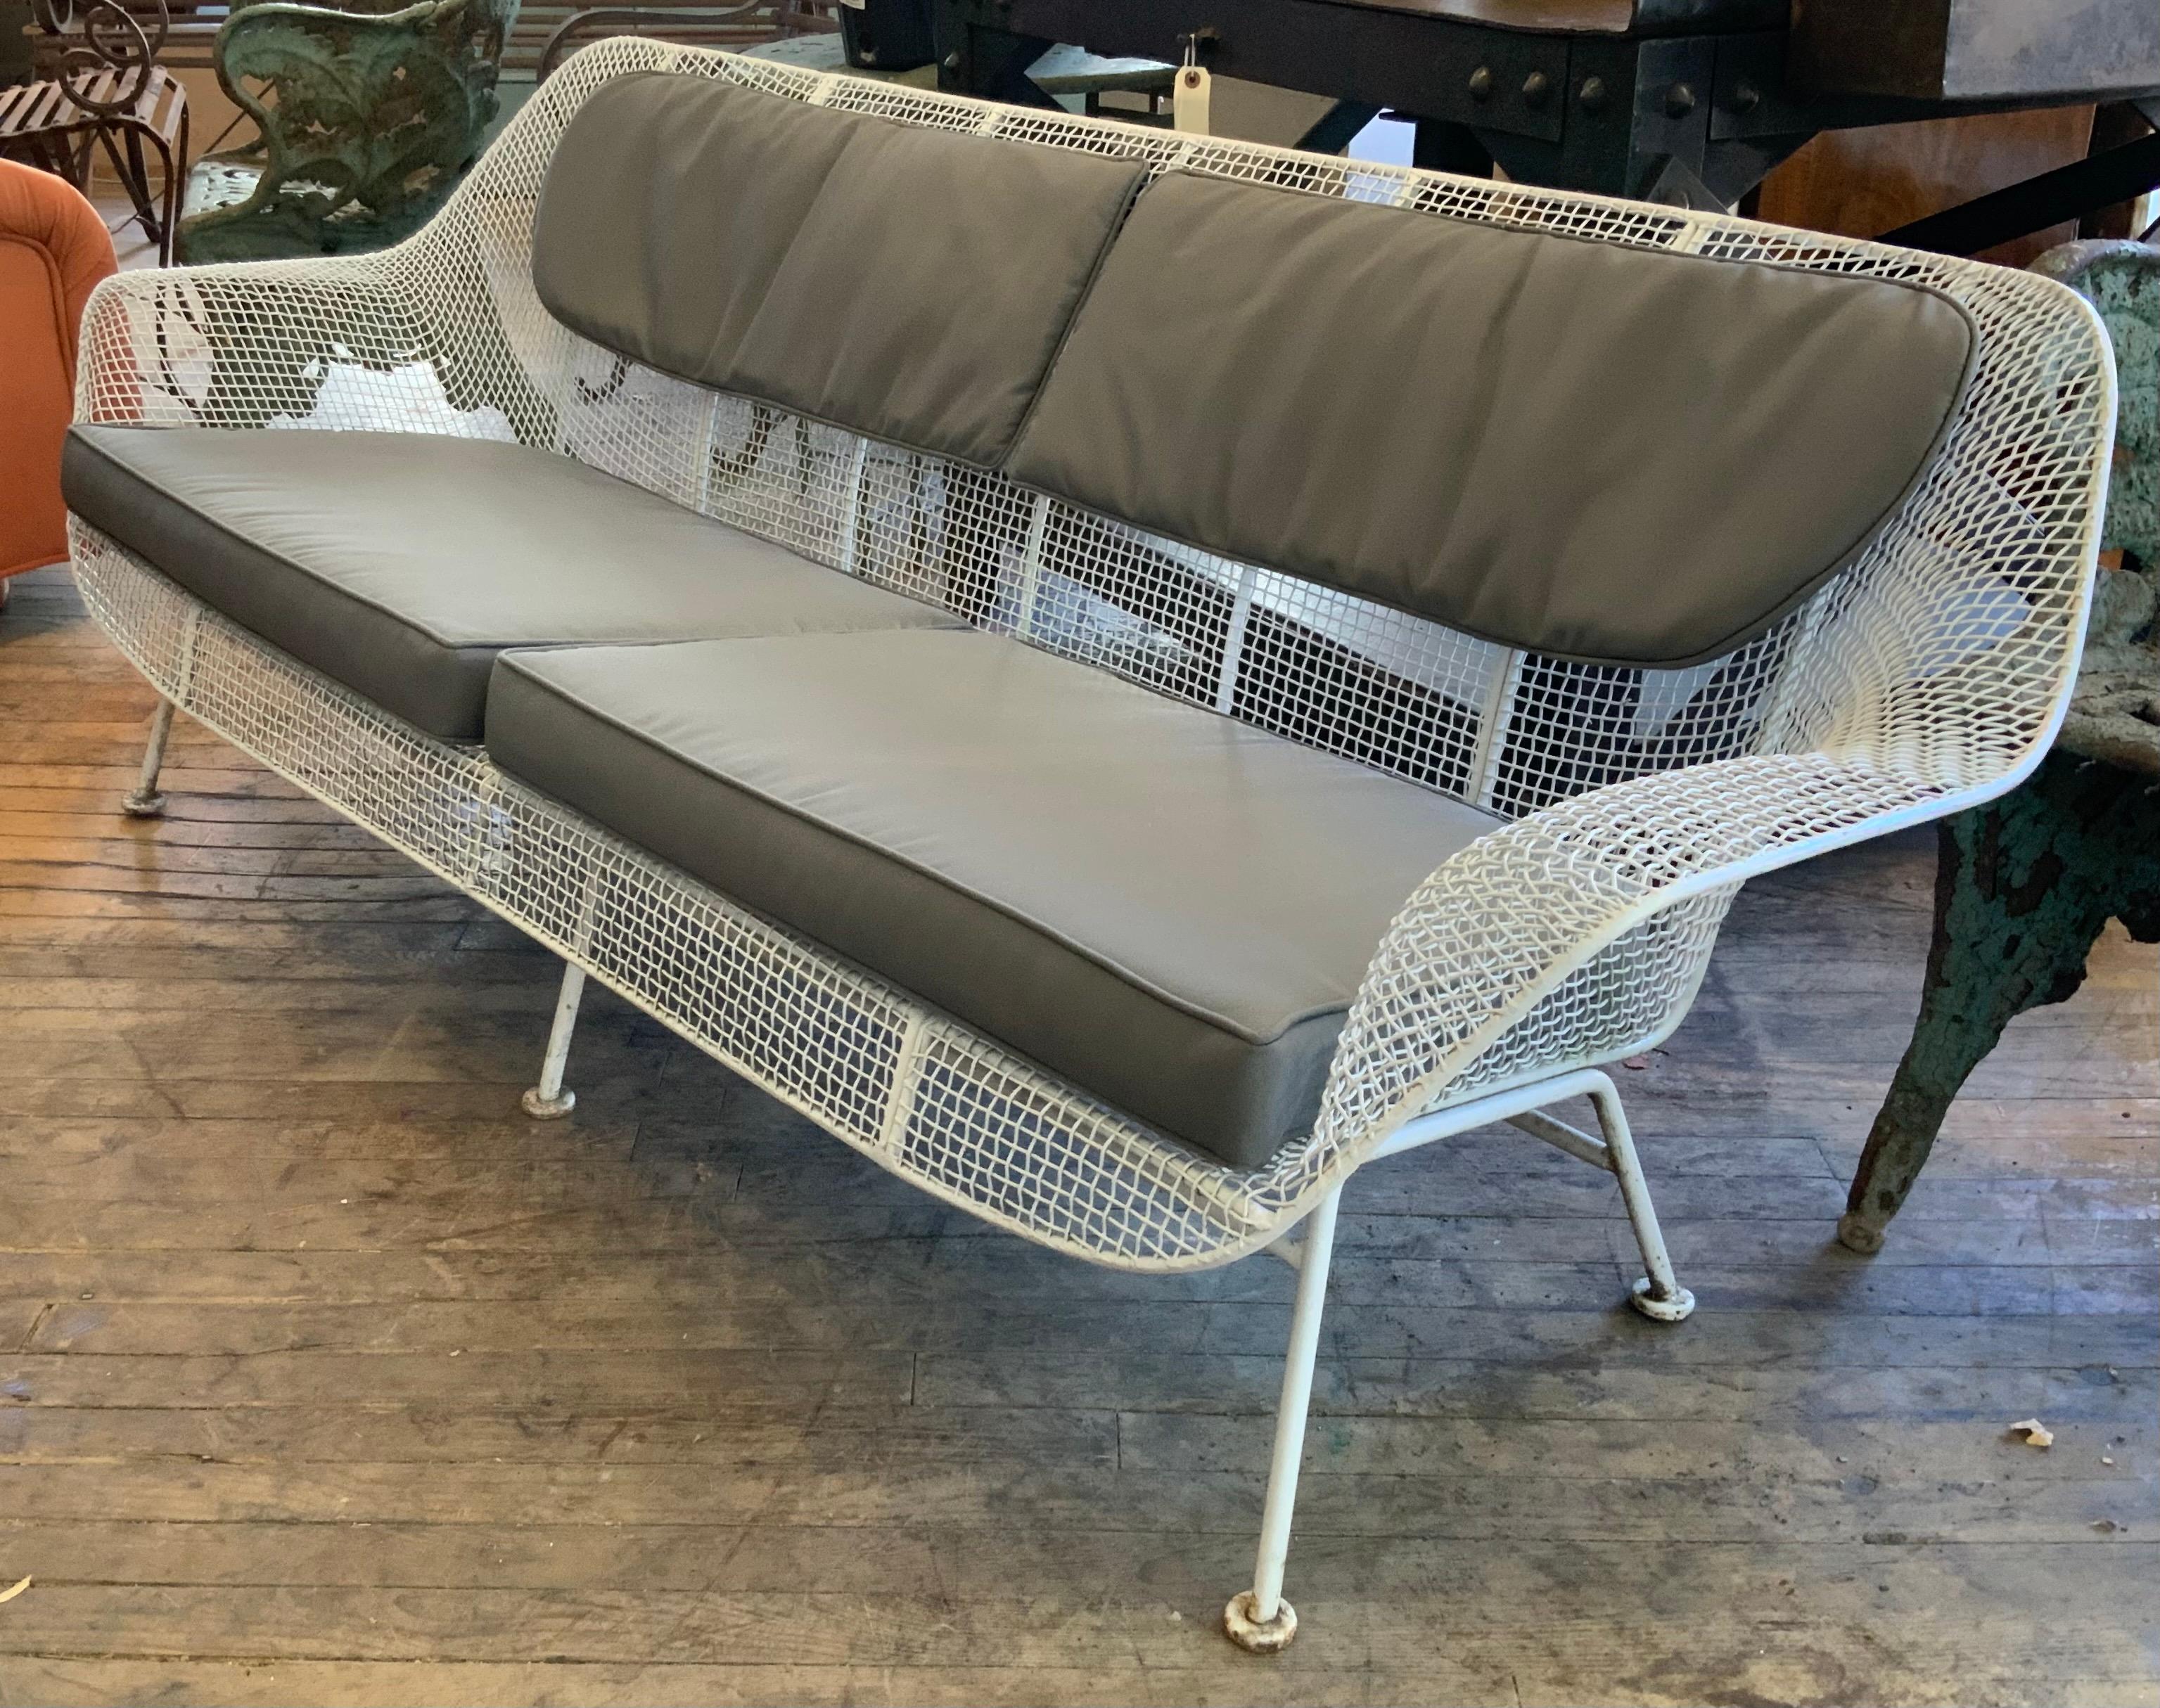 A rare example of Russell Woodard's iconic sculptura long sofa in wrought iron and woven steel mesh. Beautiful proportions in this wide and deep lounge sofa make this very comfortable and stylish. Newly refinished in satin greige or can be finished